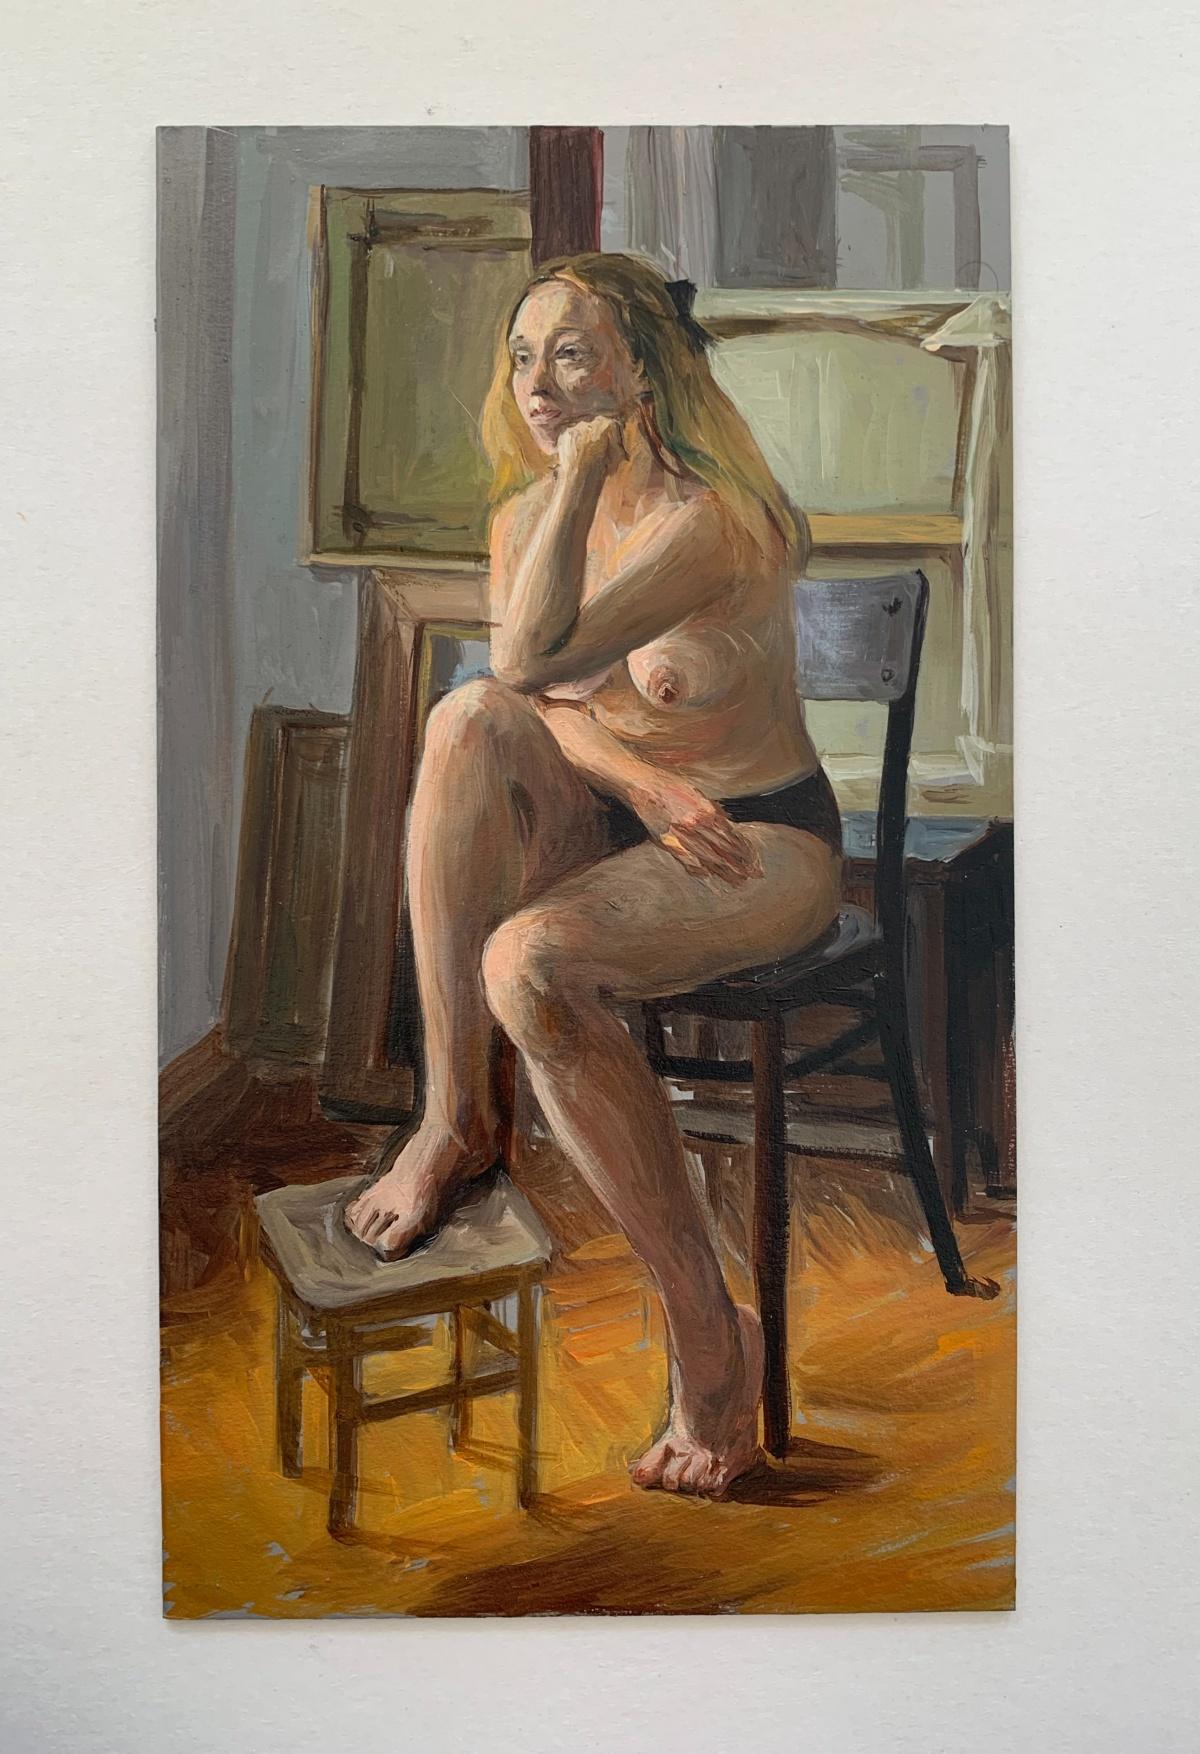 A sitter - Realistic oil painting, Female nude, Warm tones, Young Polish artist - Painting by Agnieszka Staak-Janczarska